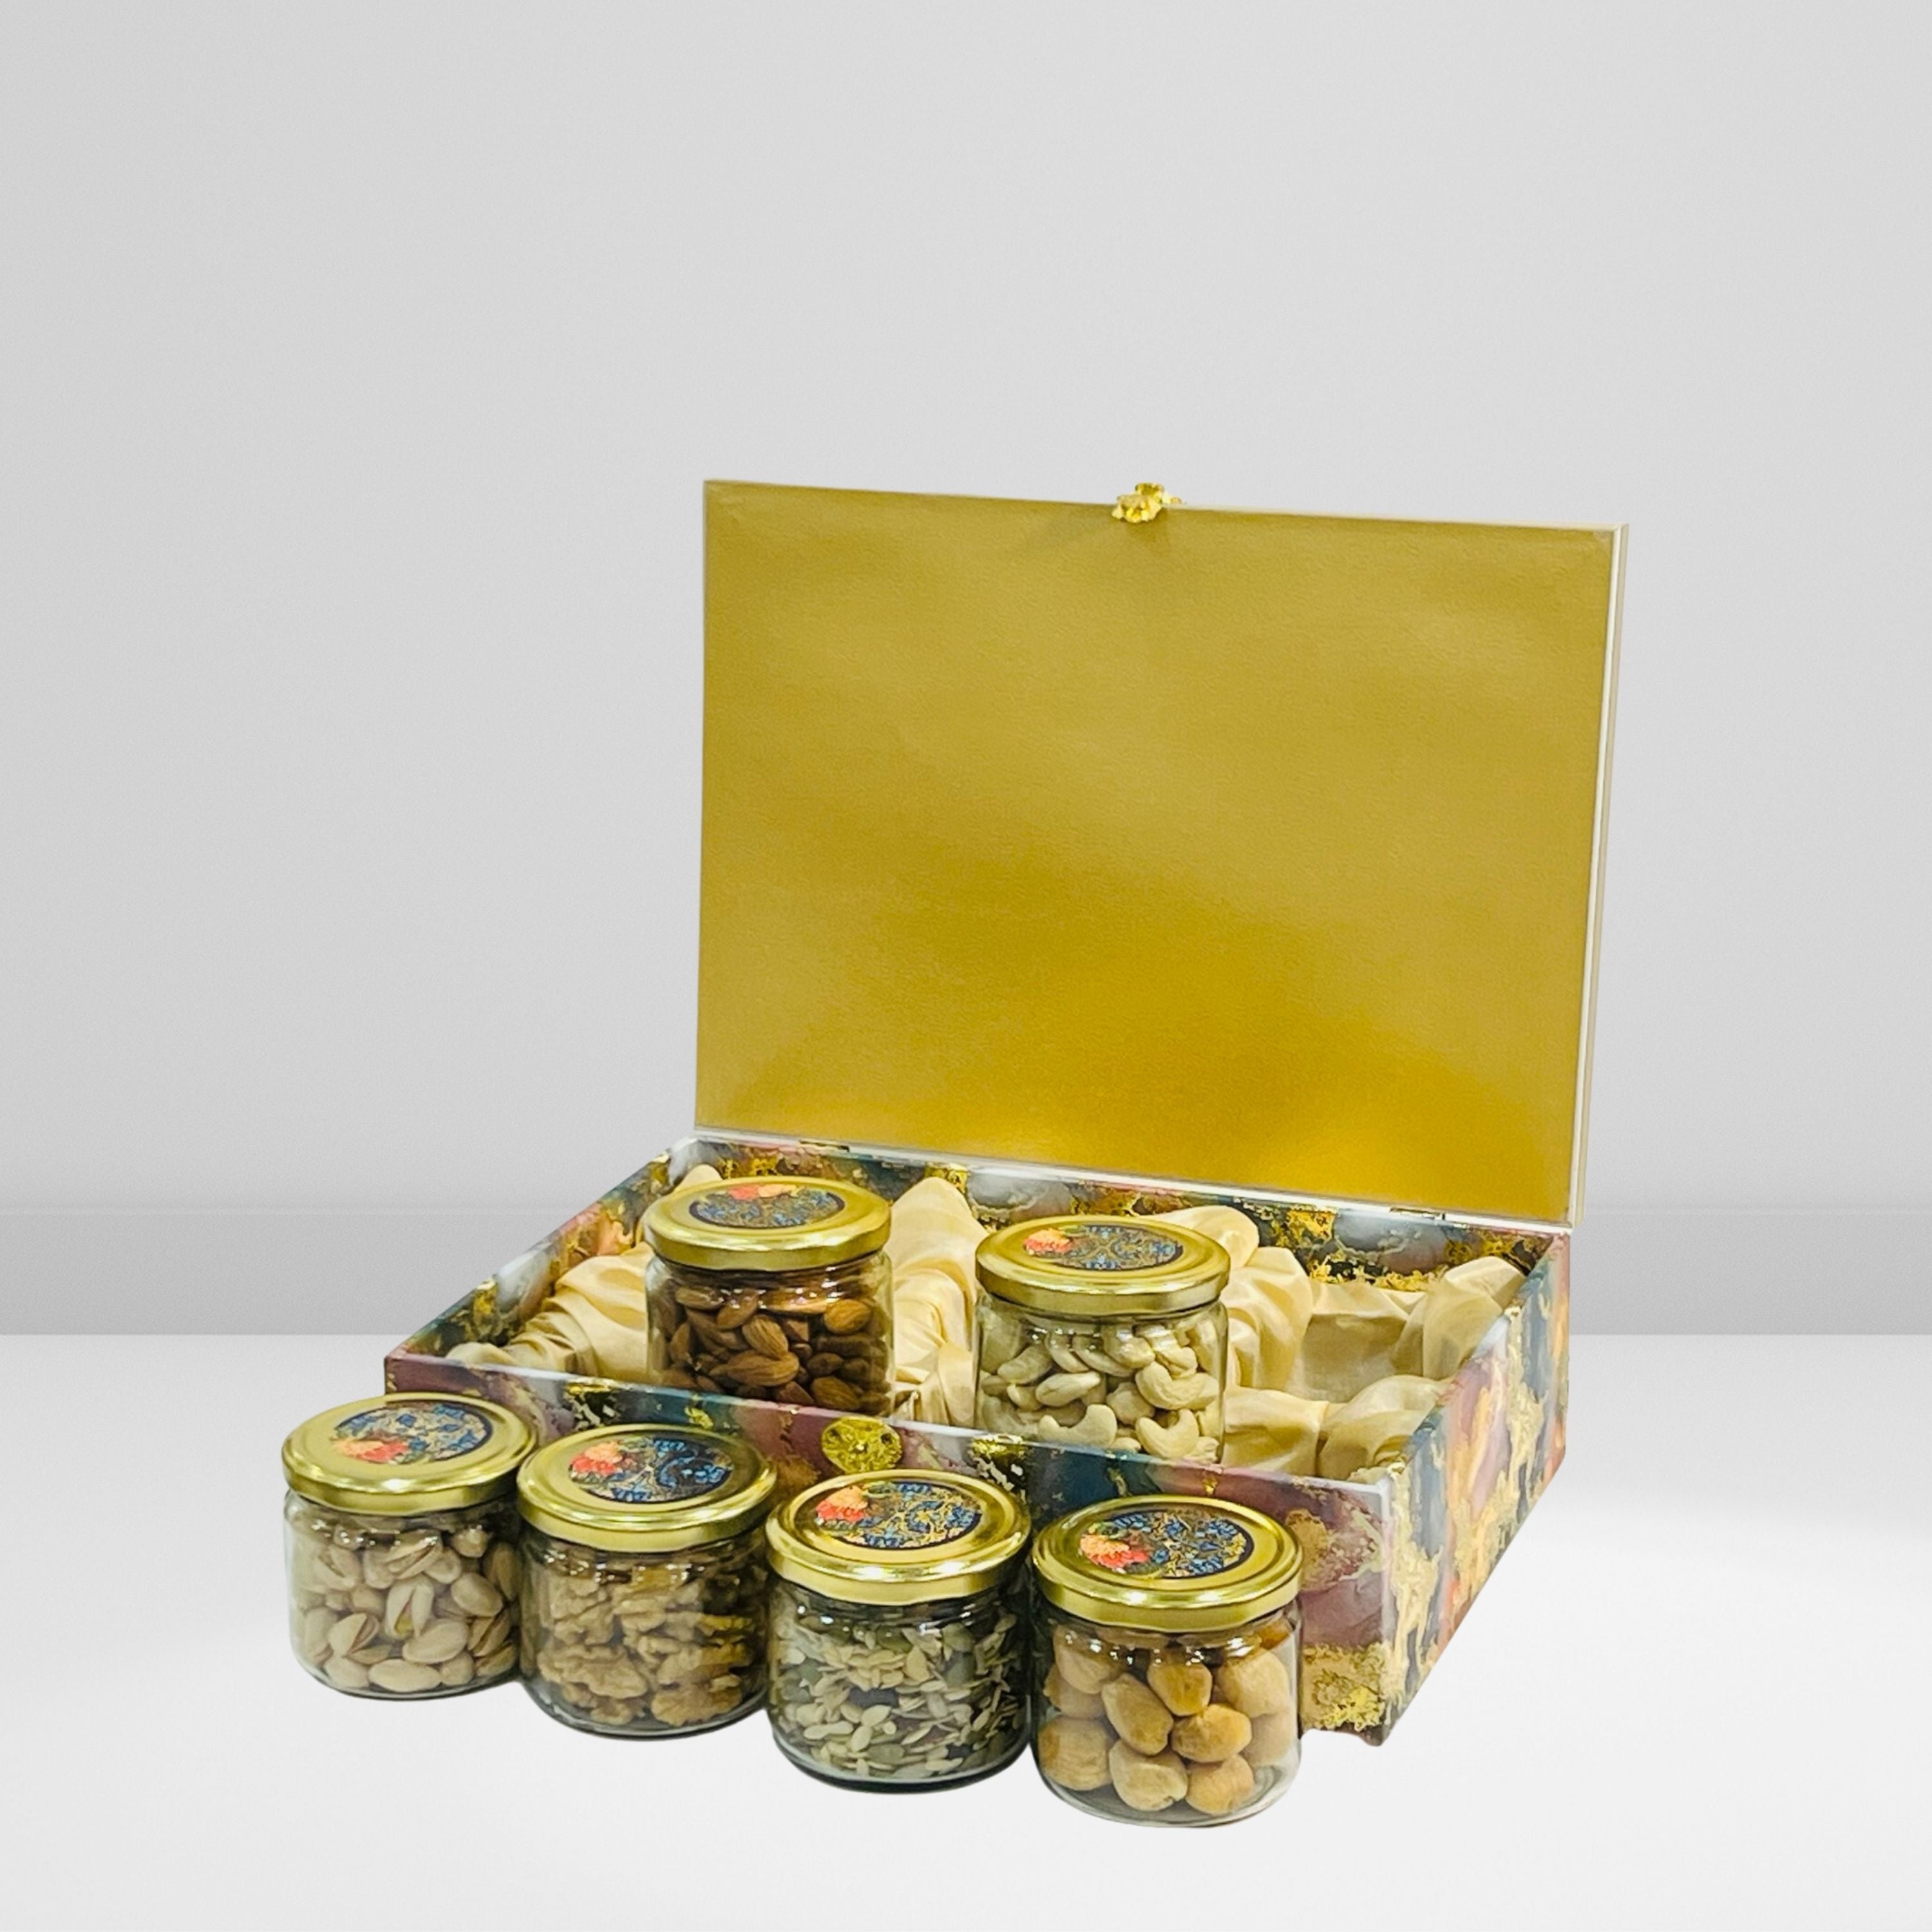 Gift Box with 6 Premium Dry Fruits